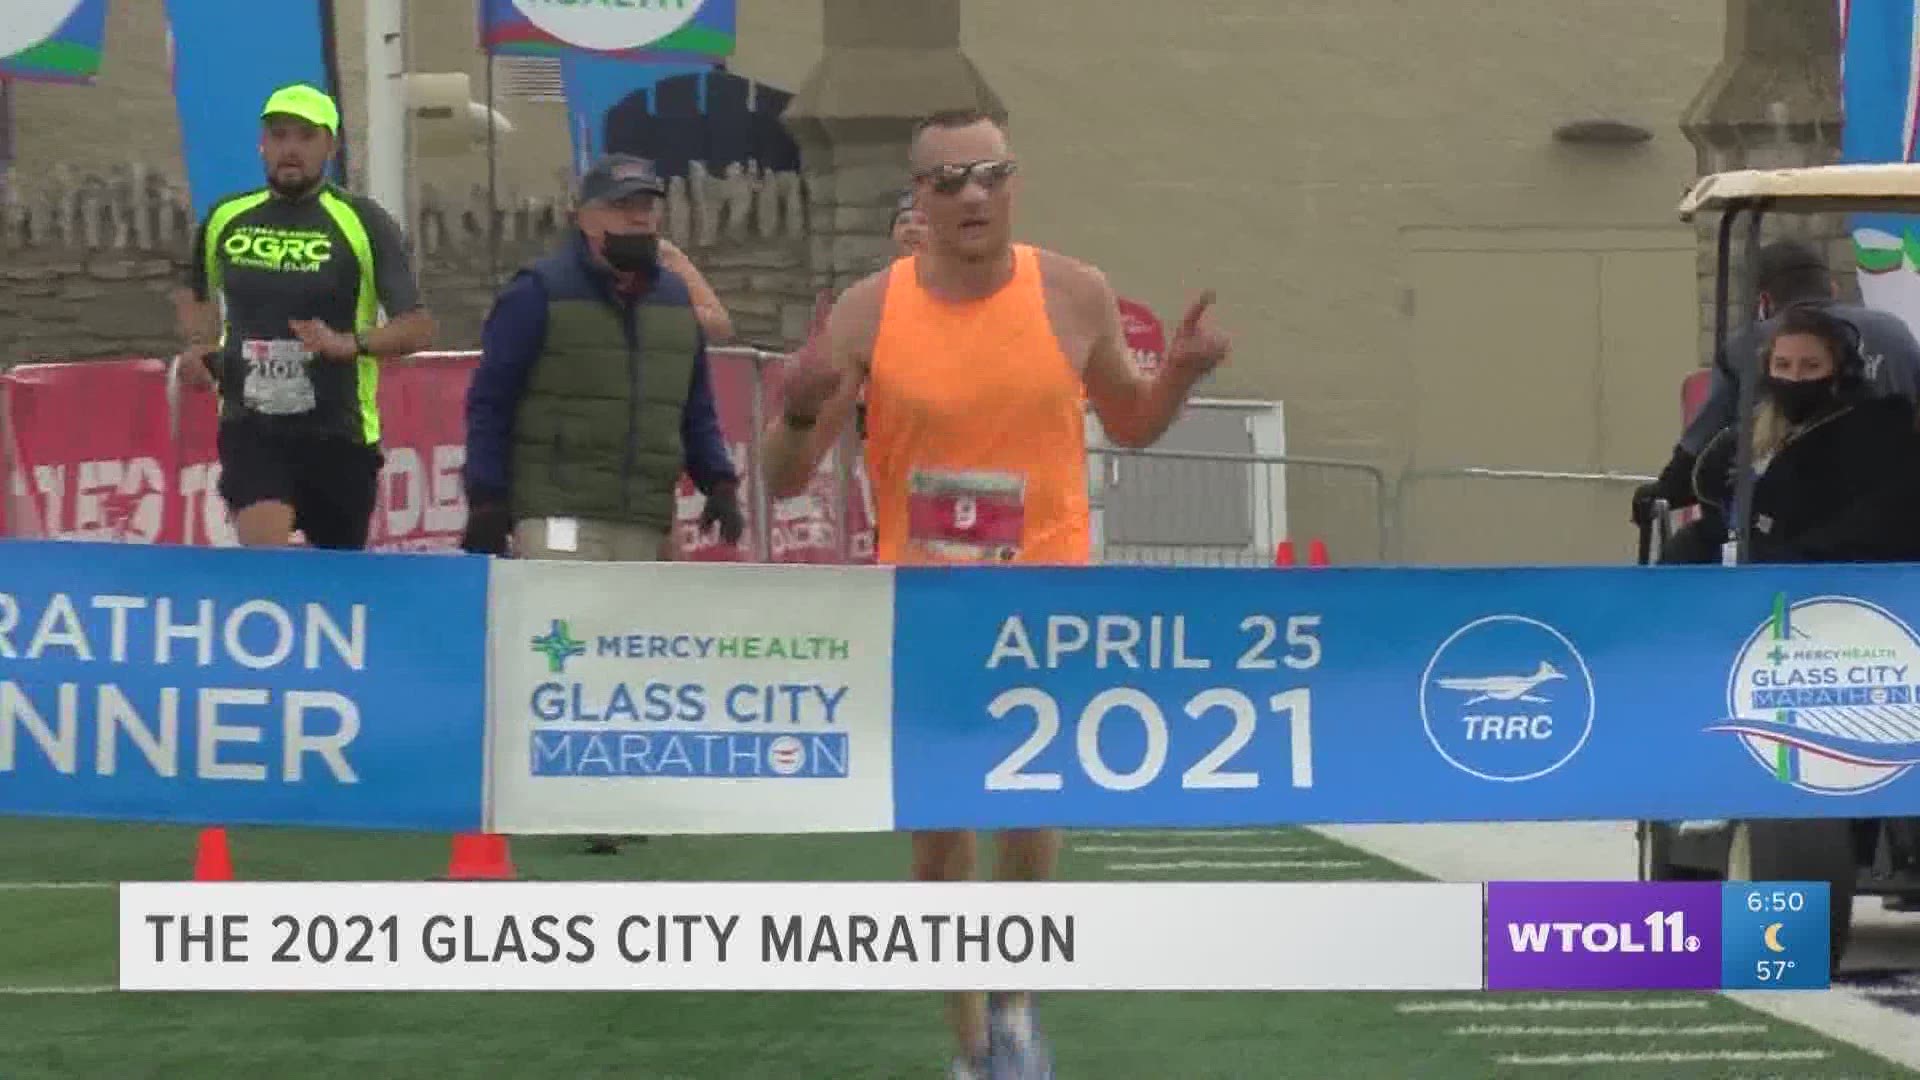 Ryan Corby won the marathon in a time of 2:21:46.85. Grace McCarron was the first female finisher with a time of 2:46:24.